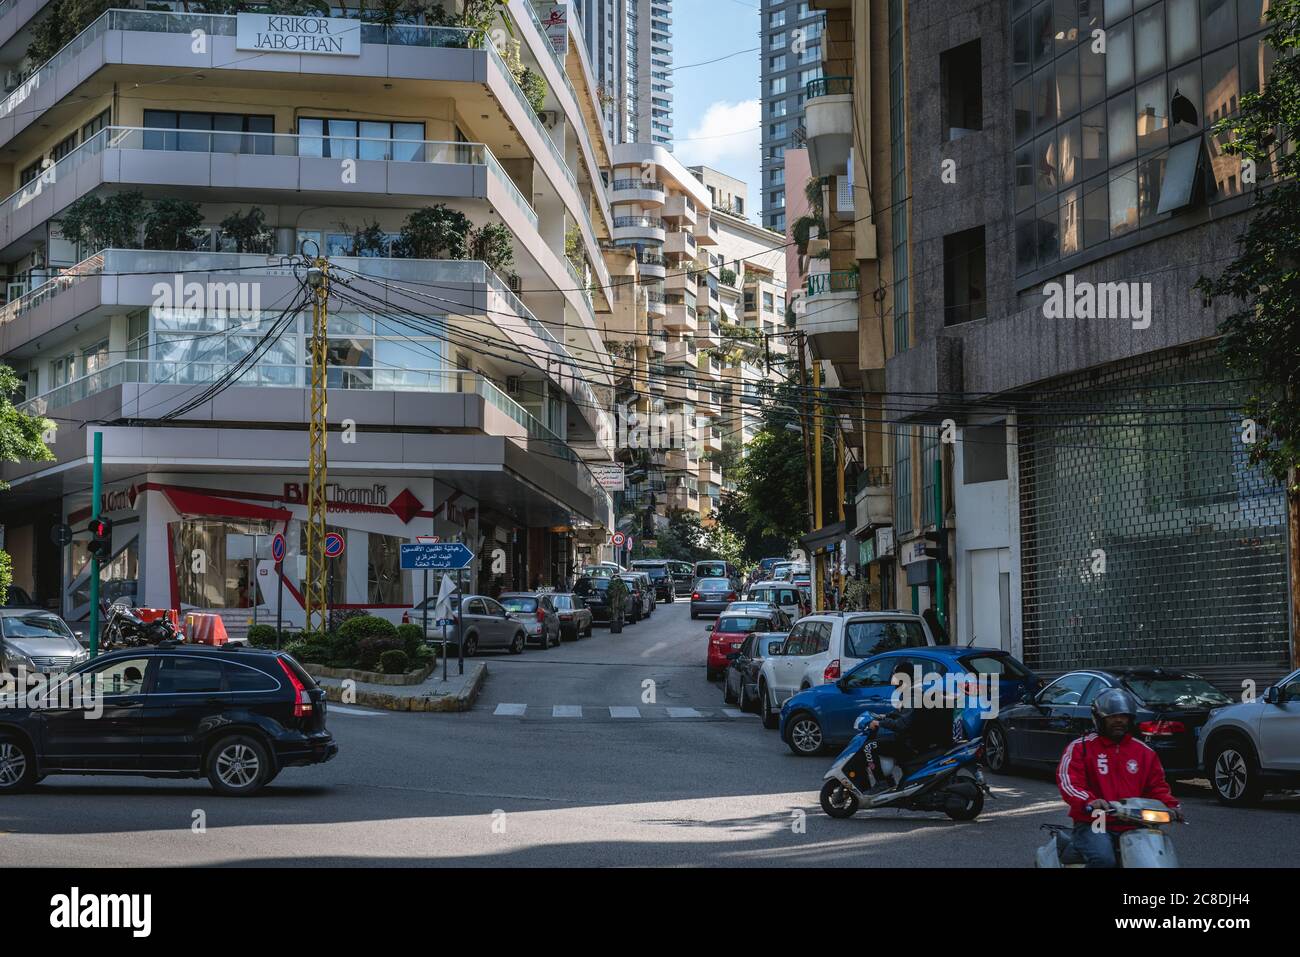 Chehade Street in Beirut, Lebanon, view with BLC Bank Stock Photo